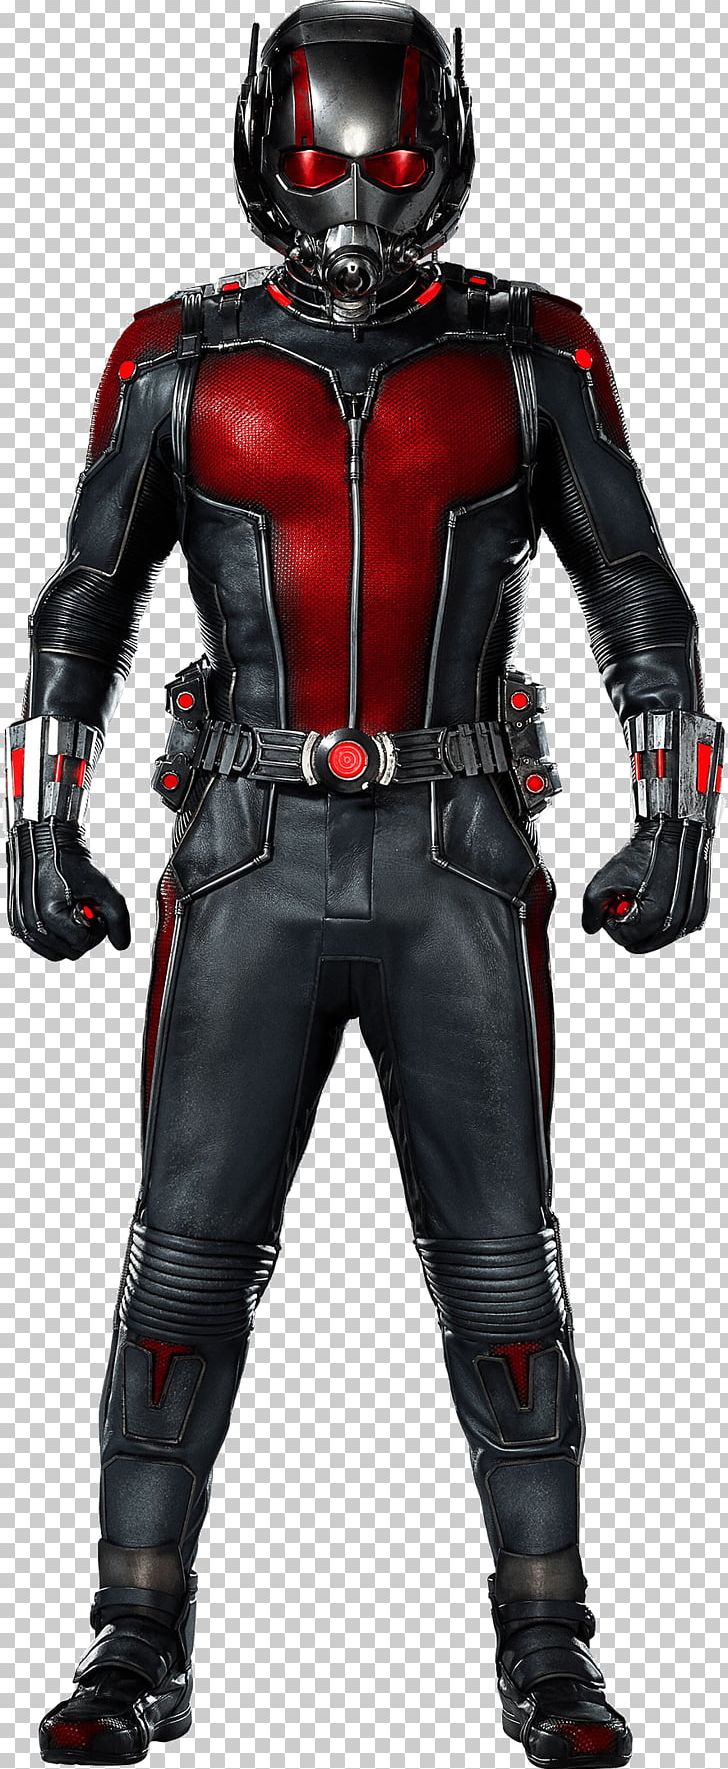 Ant-Man Hank Pym Marvel Cinematic Universe PNG, Clipart, Action Figure, Antman, Ant Man, Armour, Avengers Free PNG Download